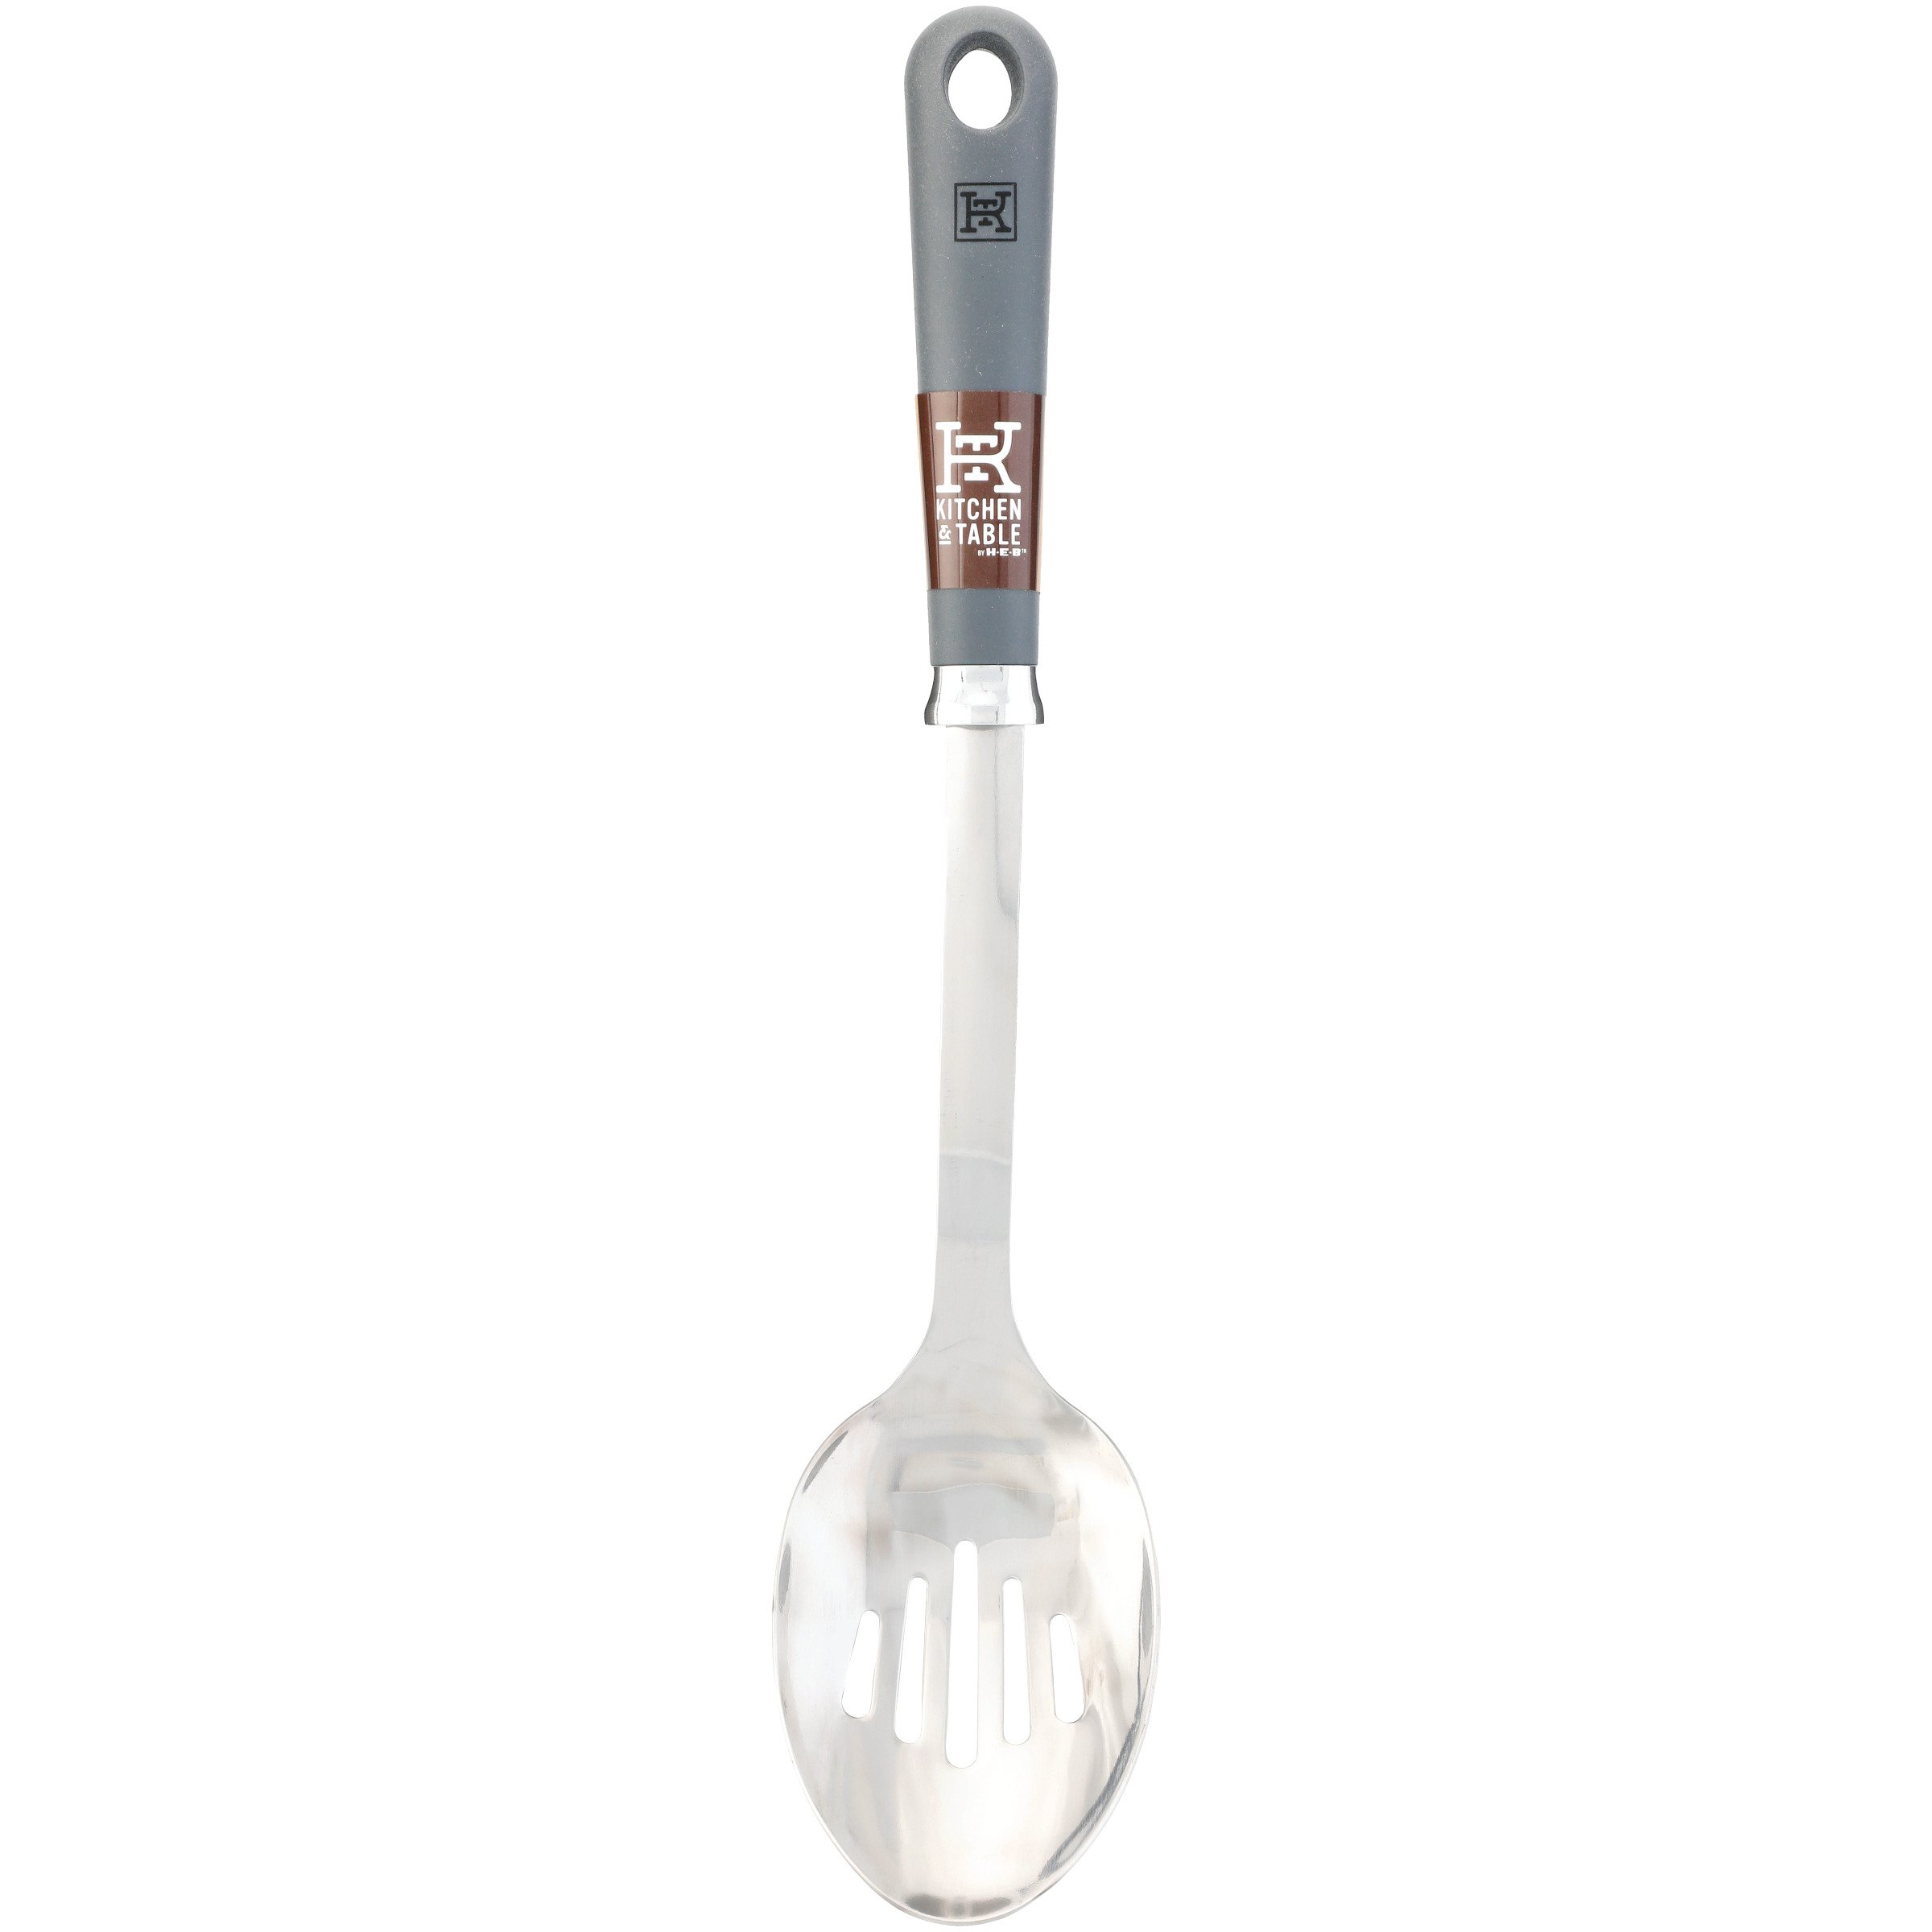 Set of Nylon Cooking Utensils - Slotted Spoon/Solid Spoon/Slotted